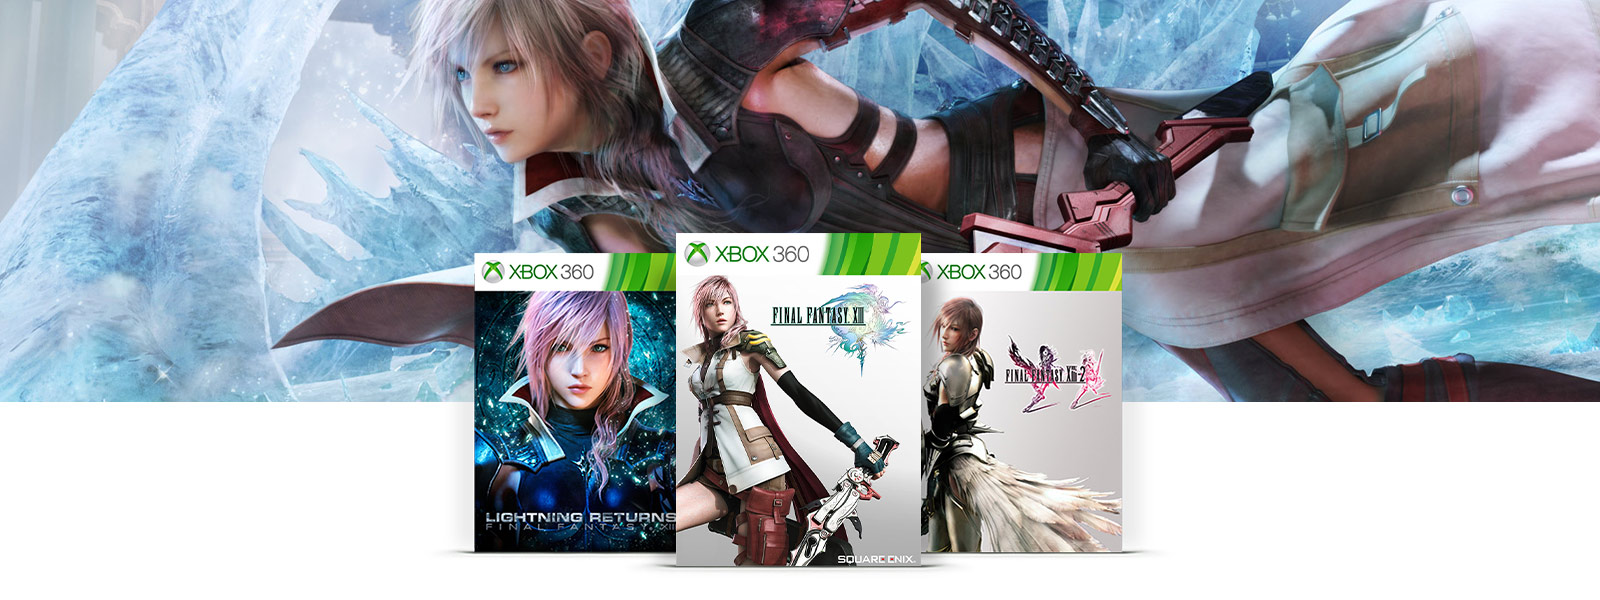 all final fantasy games on xbox one